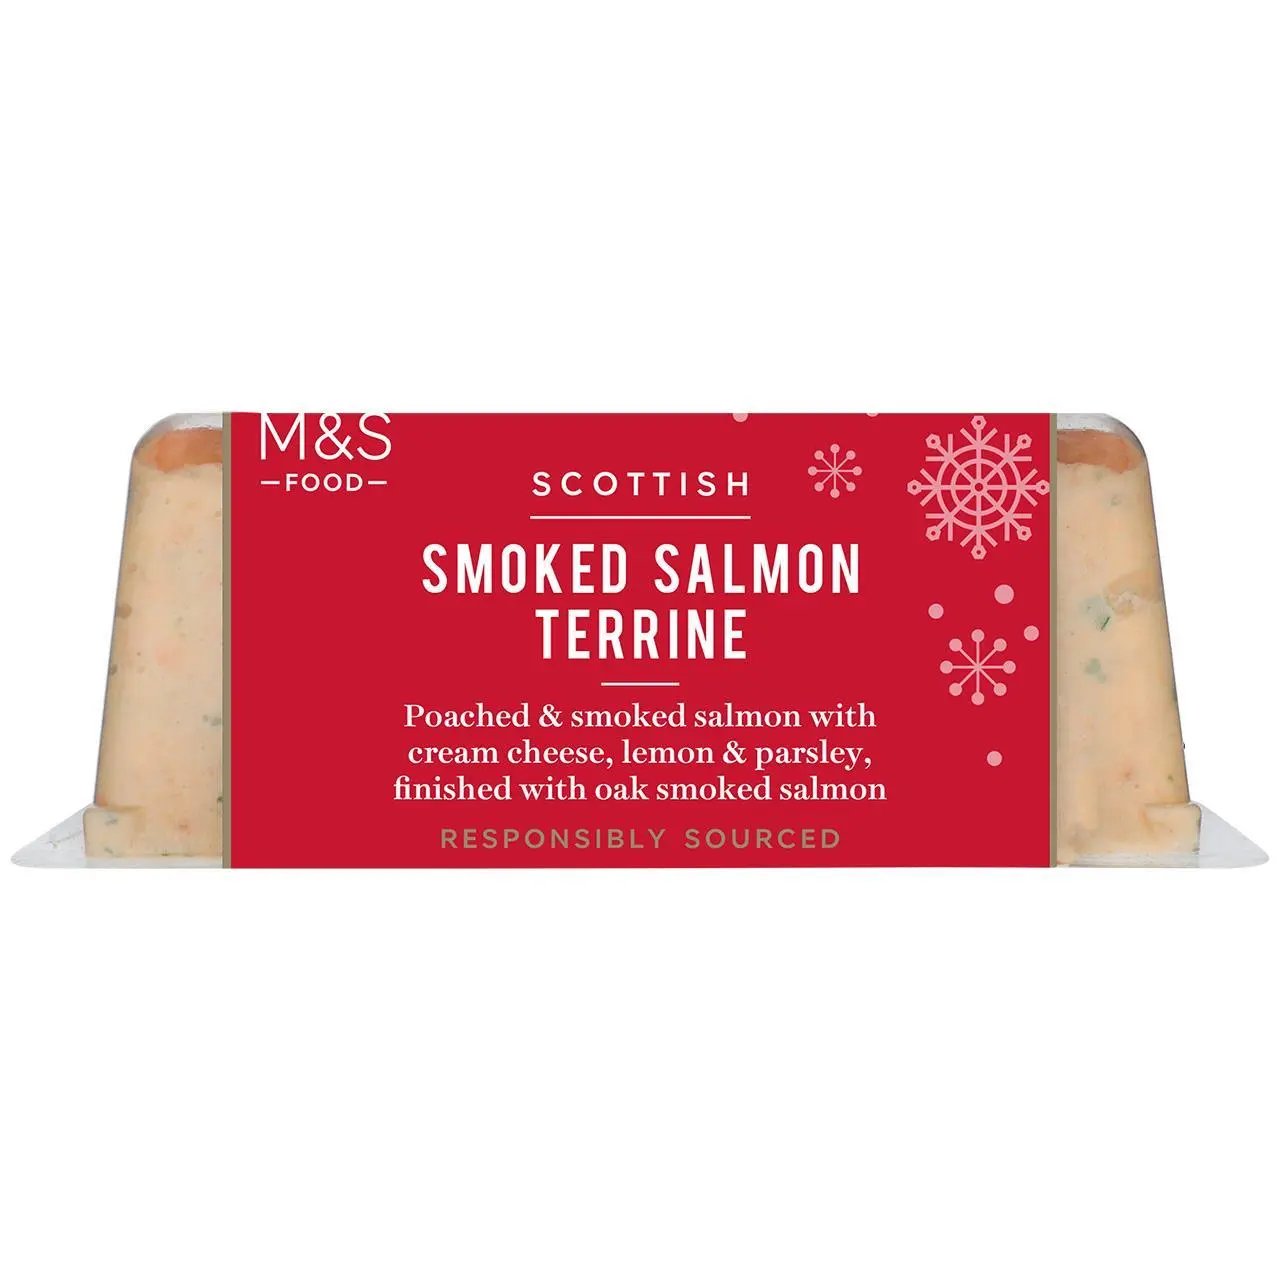 marks and spencer smoked salmon terrine - How many calories are in a smoked salmon terrine